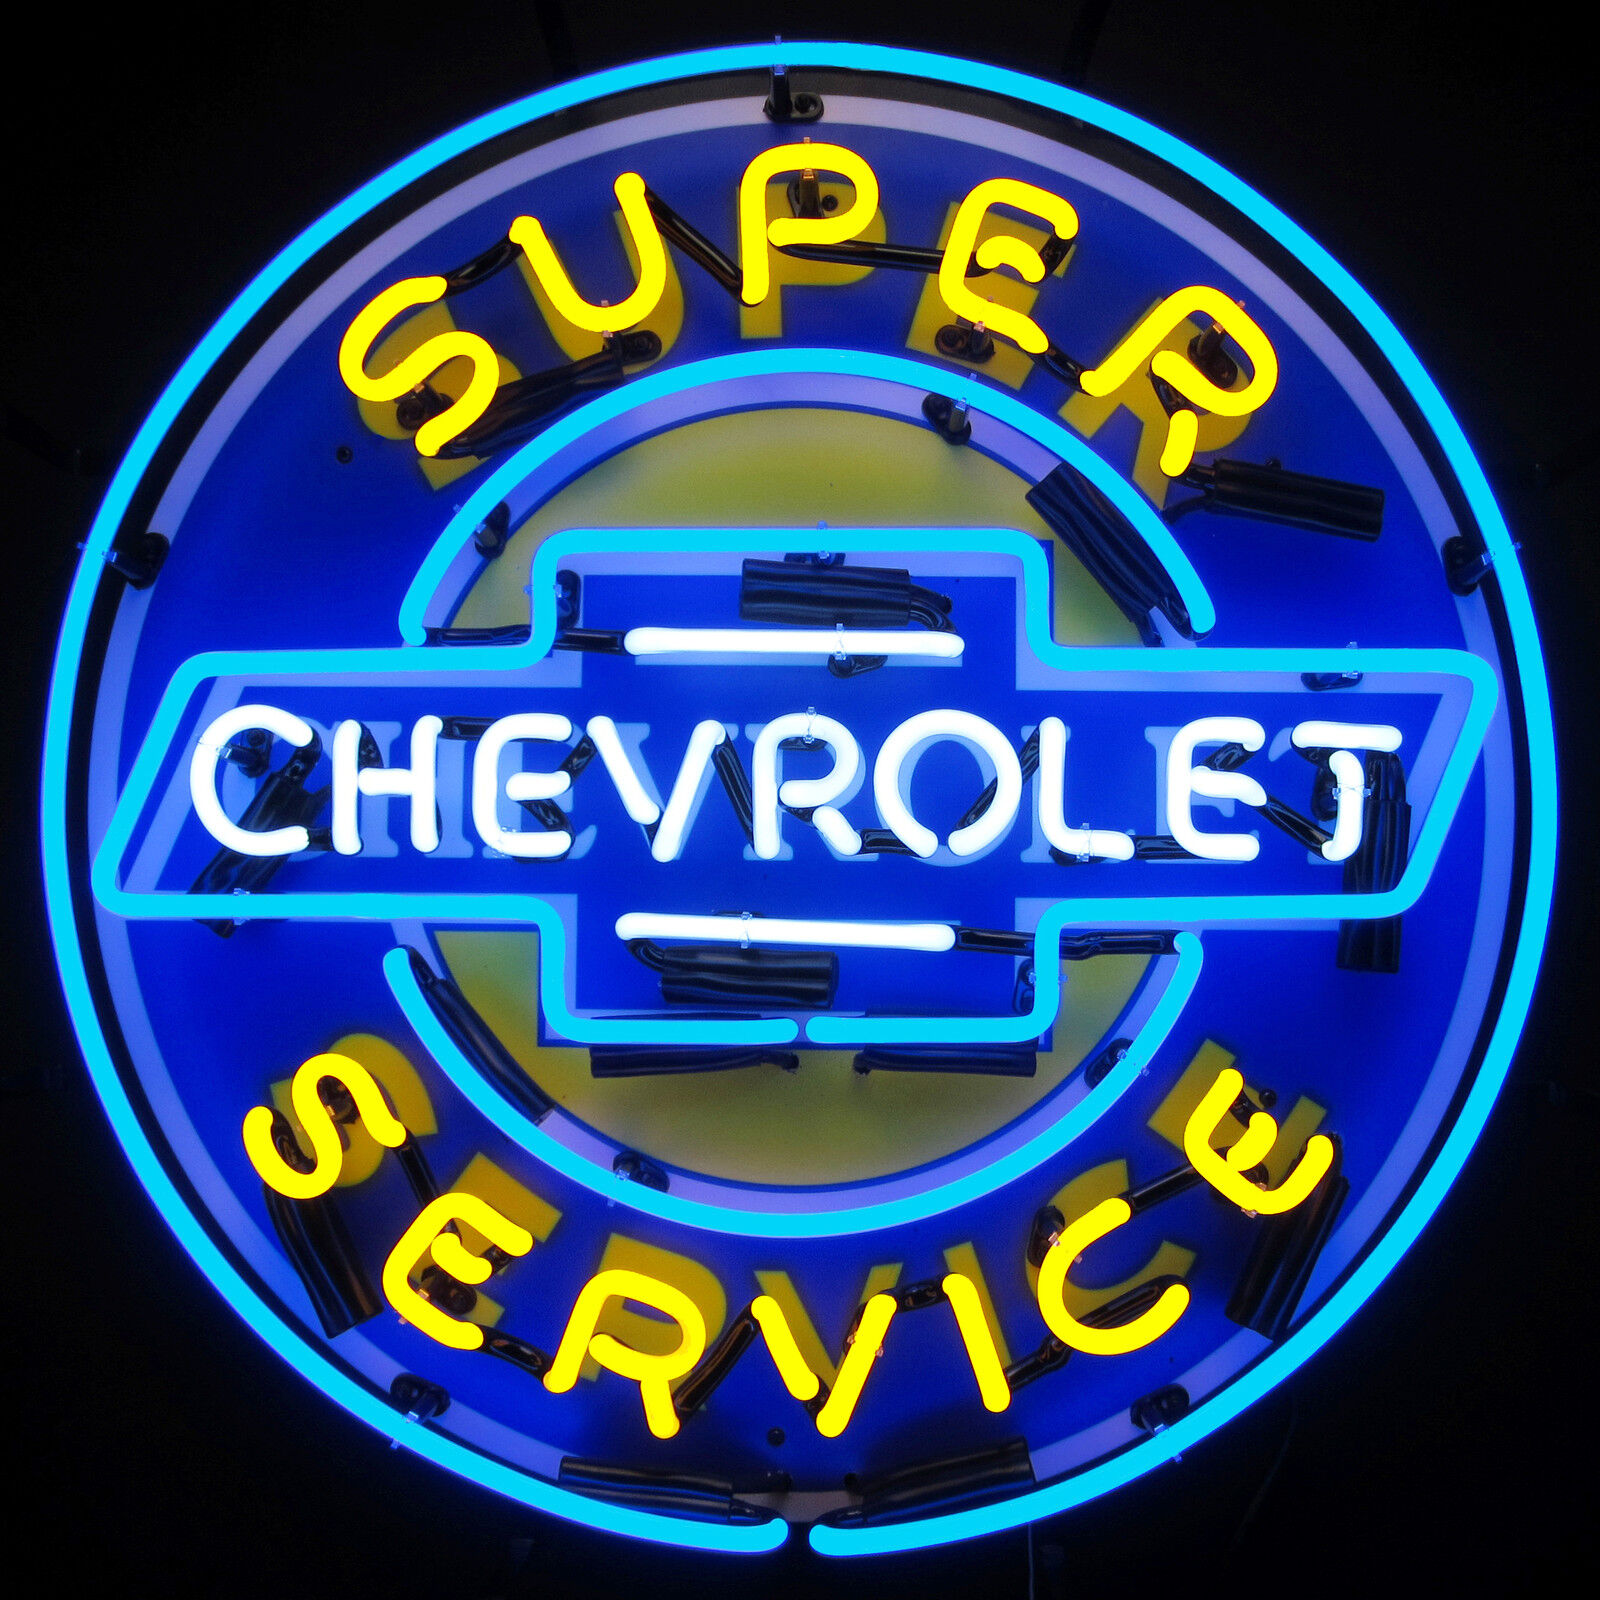 Chevy Neon Sign Super Chevrolet Service Parts wall lamp light Muscle car garage